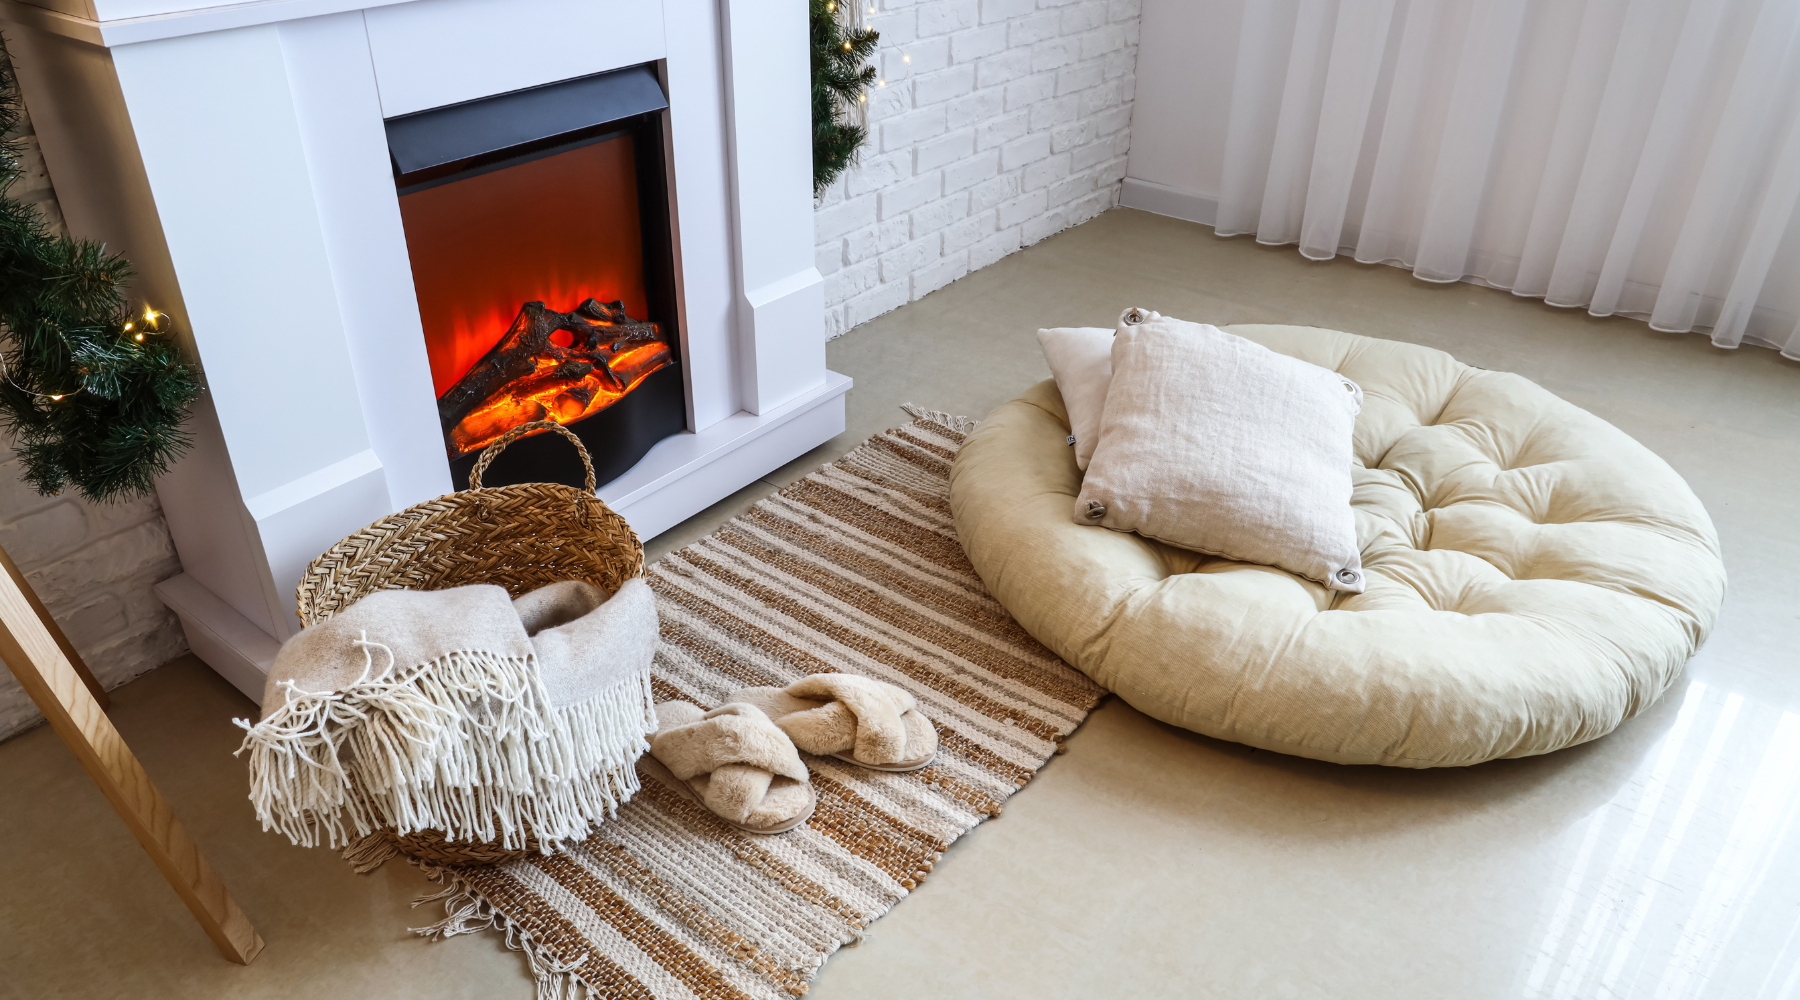 Around the Fire Place Looks We're Loving!